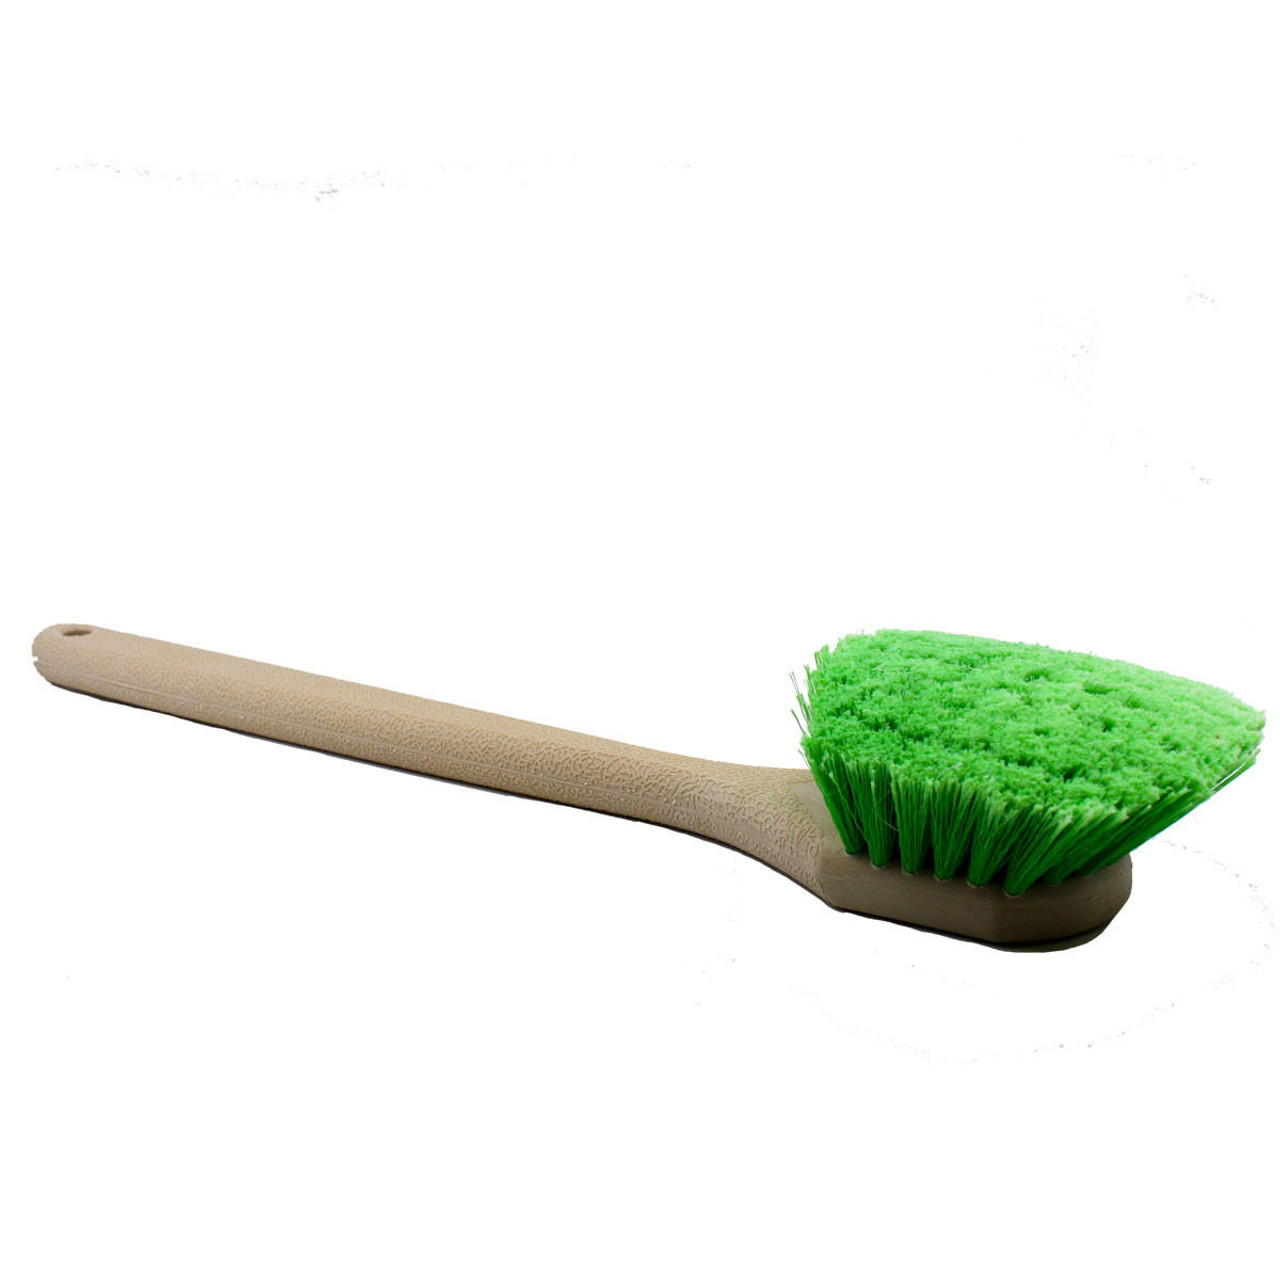 https://cdn11.bigcommerce.com/s-ndtdat03b2/images/stencil/1280x1280/products/9459/16330/autogeek-long-handle-tire-and-wheel-brush__28405.1663862076.jpg?c=1